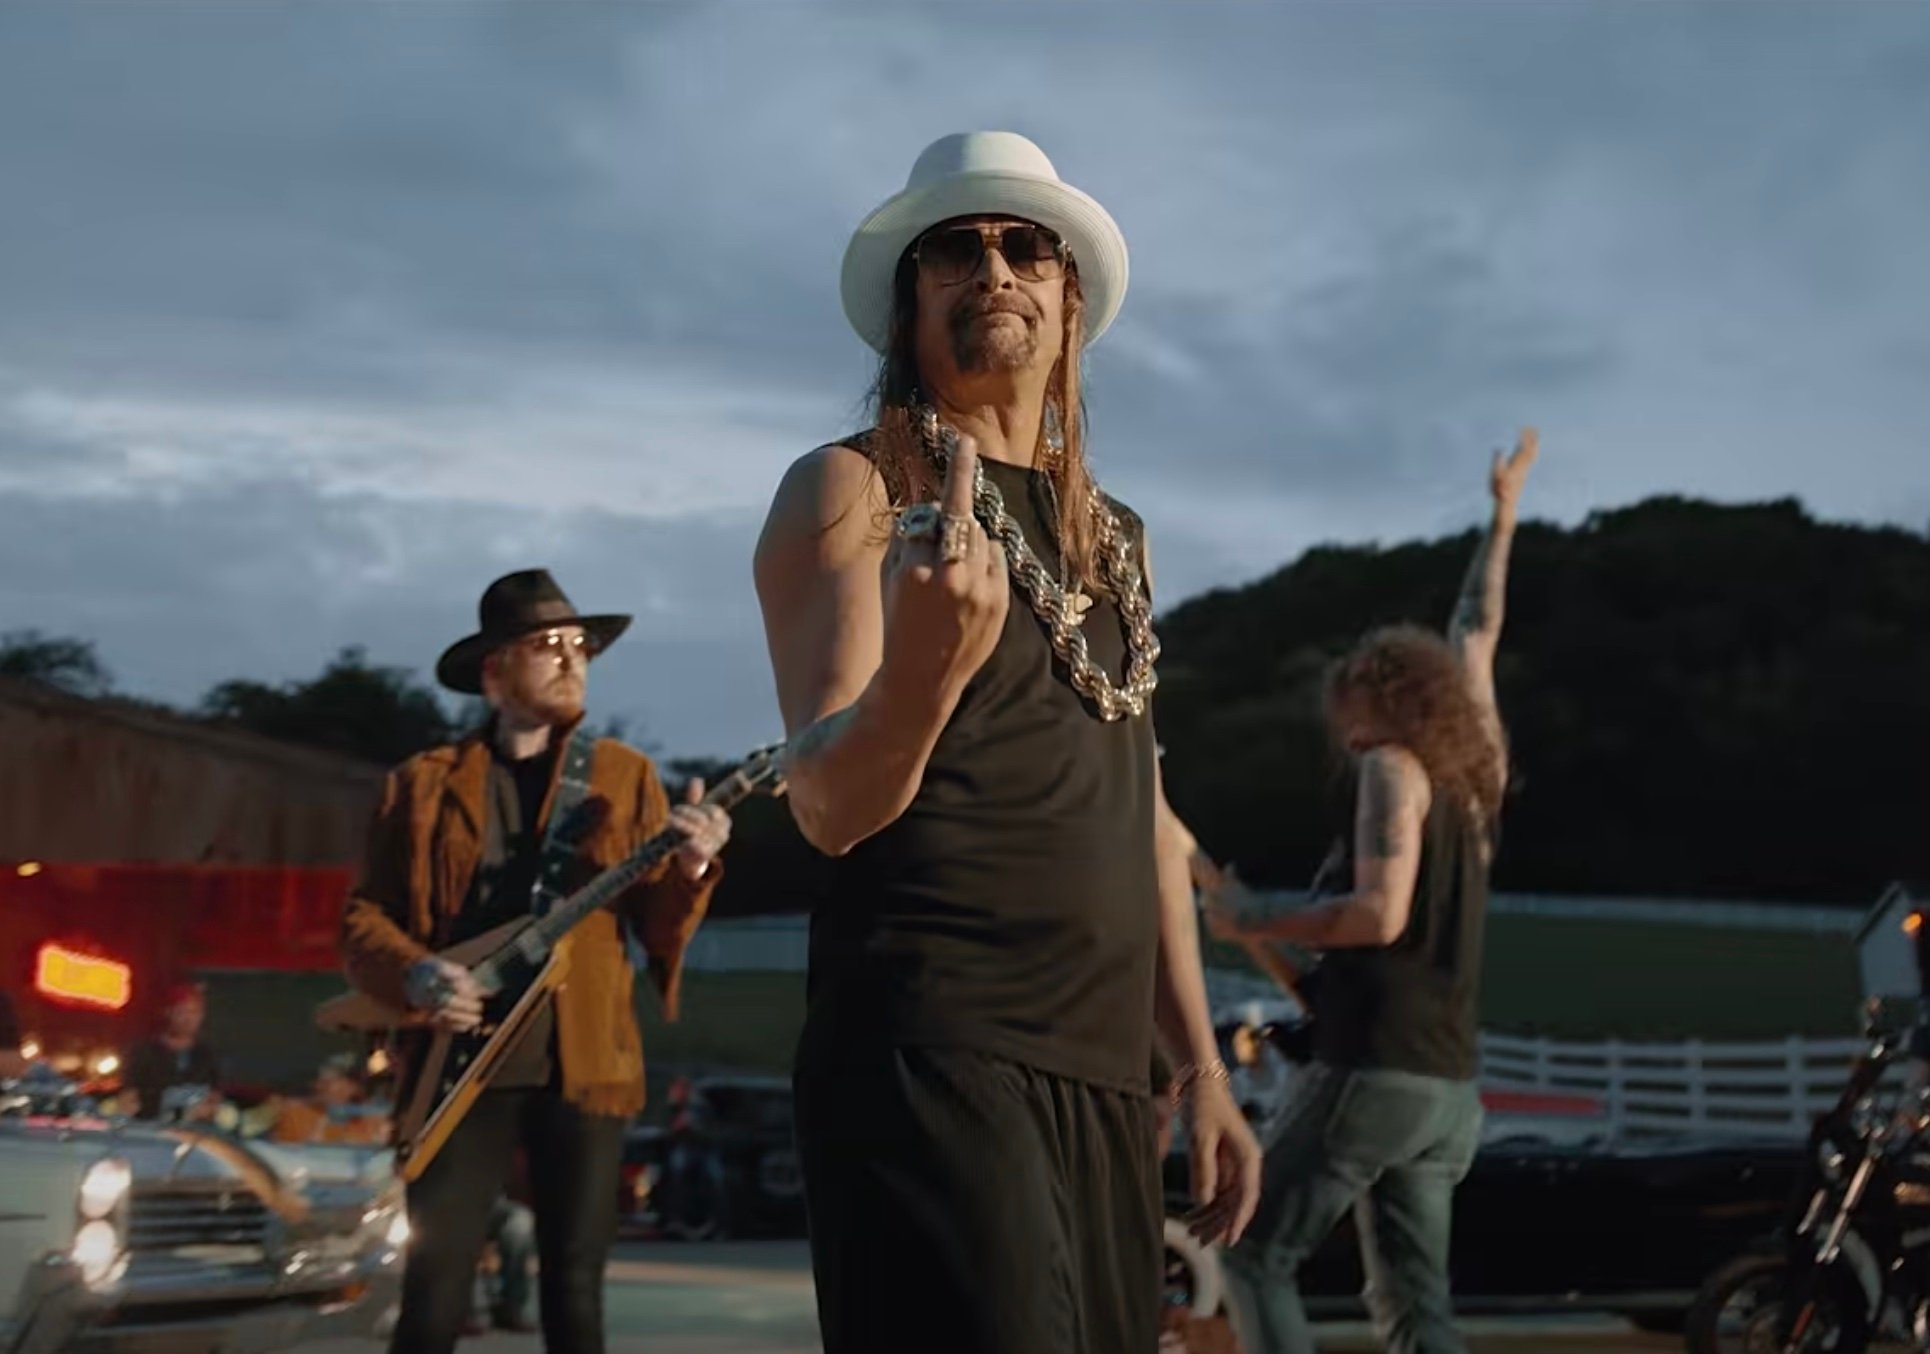 Kid Rock news & latest pictures from